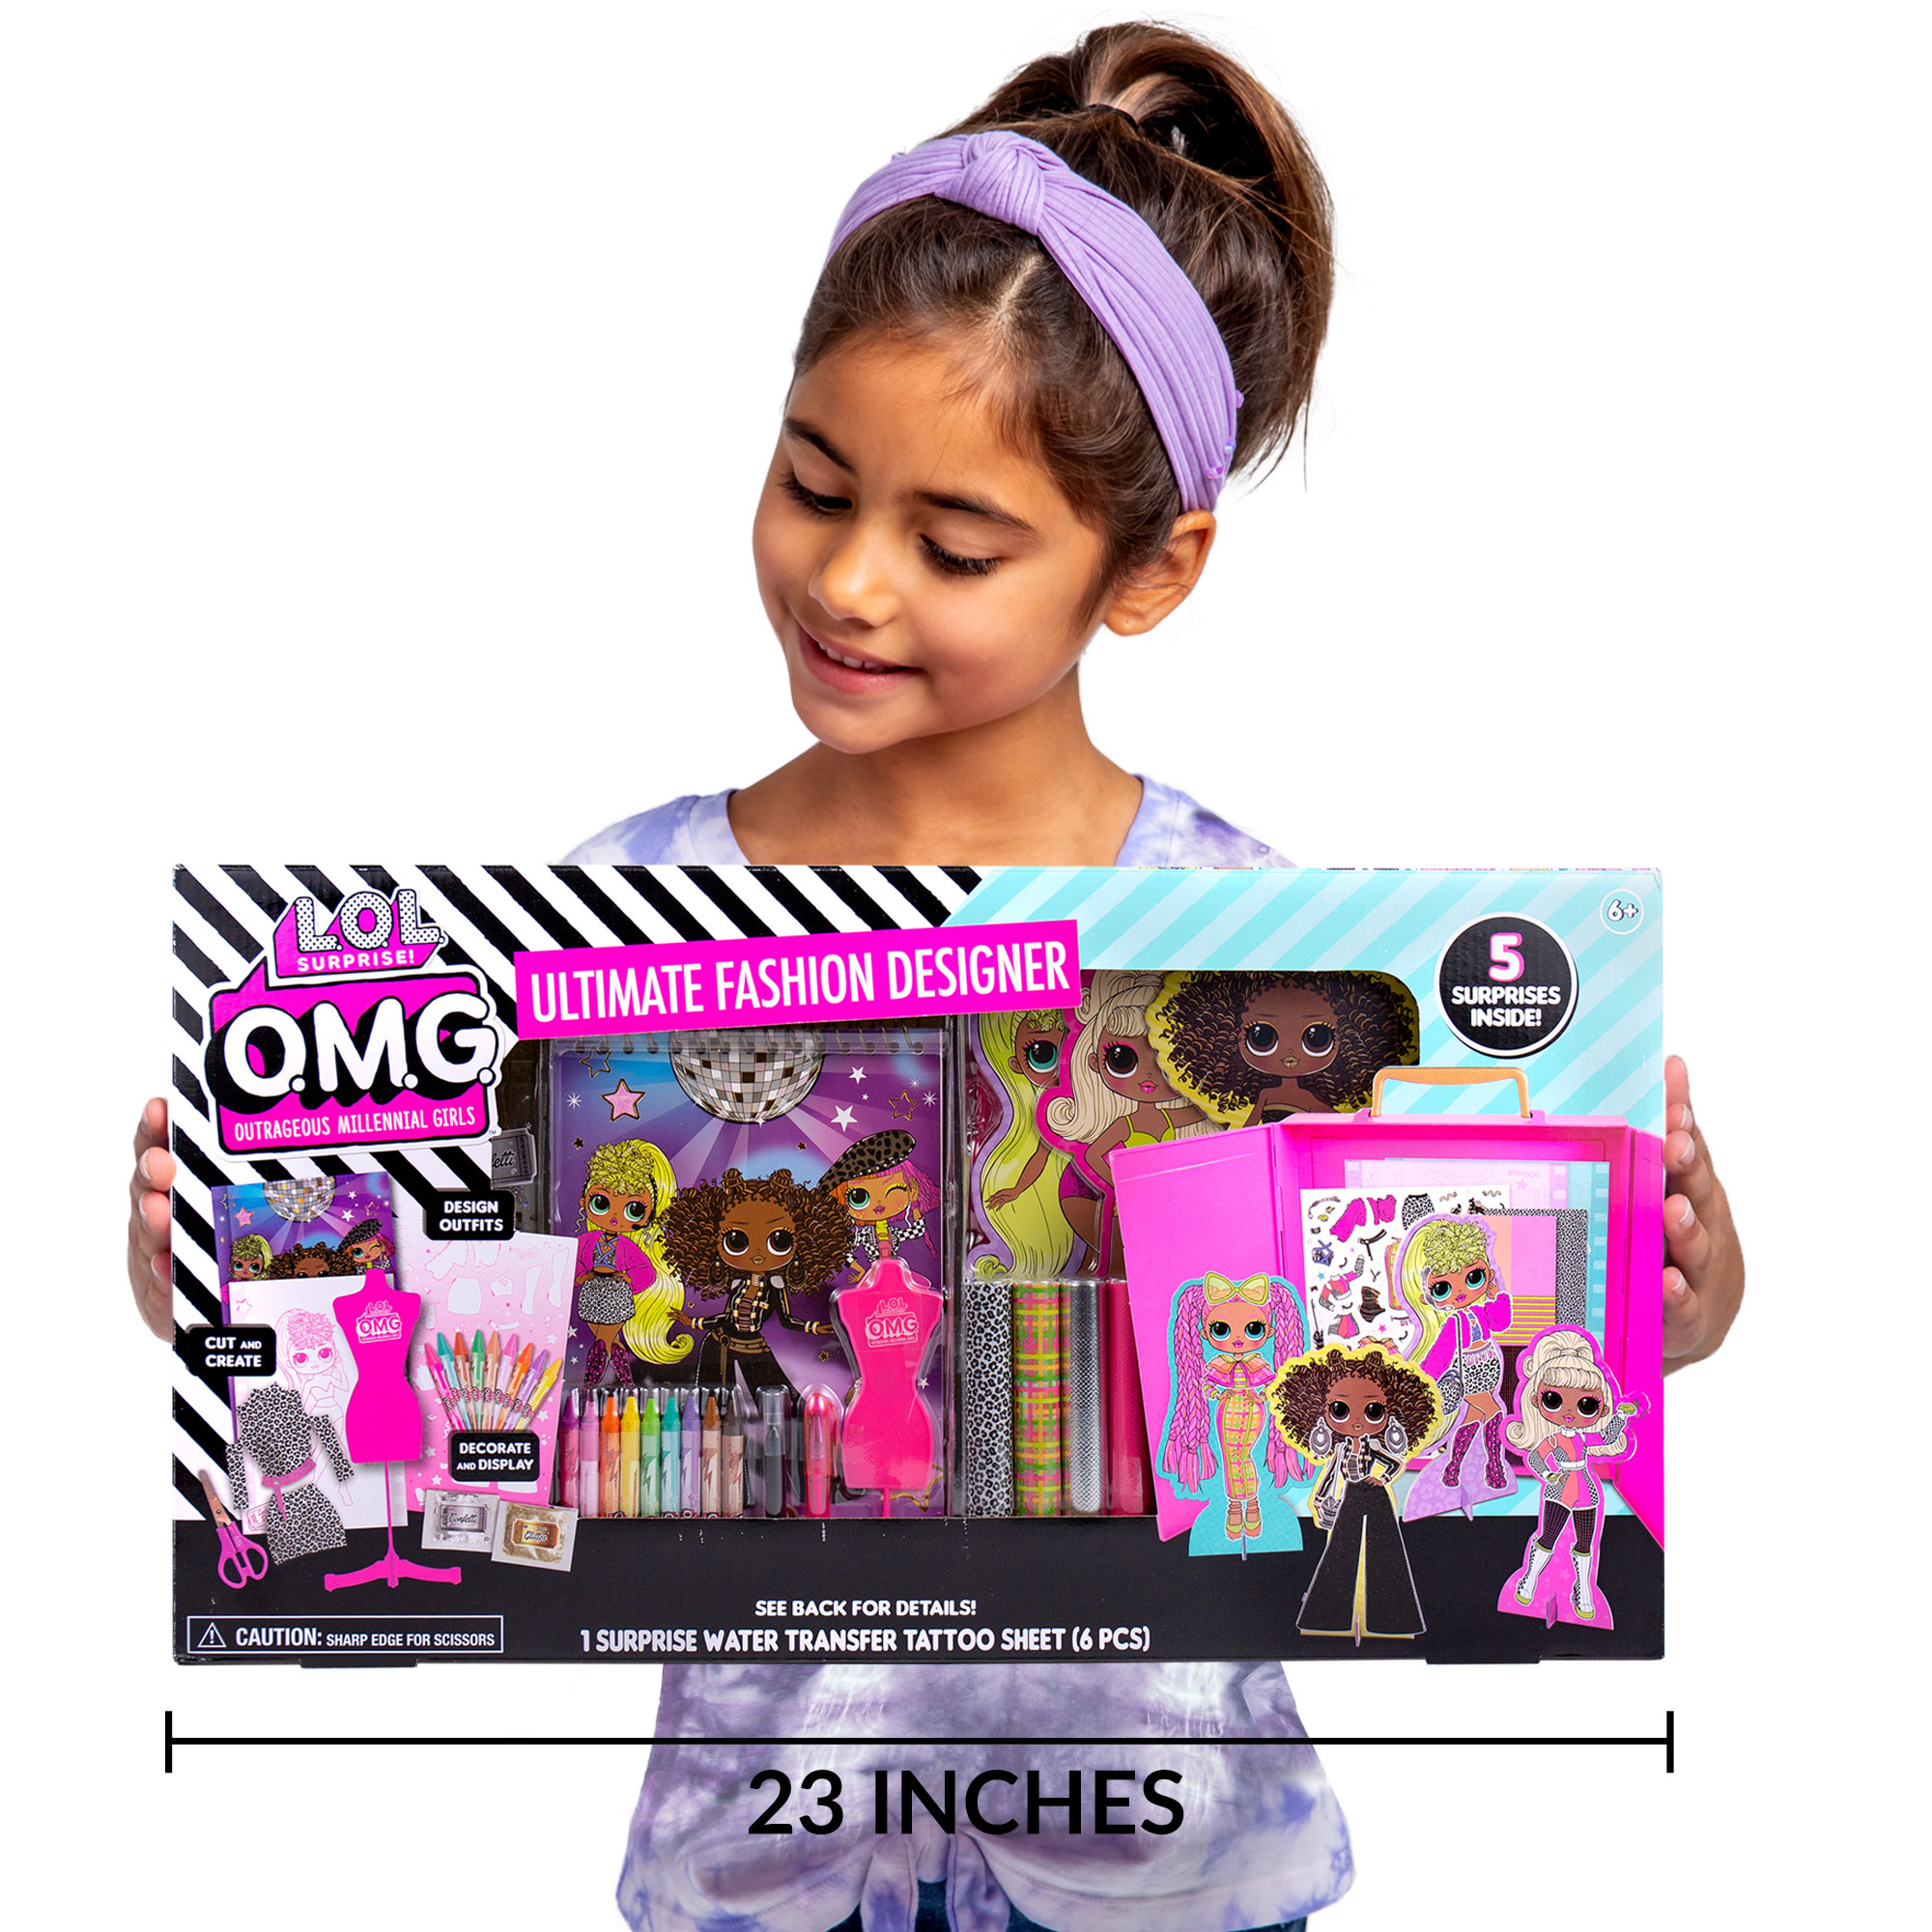 L.O.L. Surprise! O.M.G. Ultimate Fashion Designer, Double Feature Series, Decorate 4 Die-Cut Dolls With 300+ Accessories, 5 Surprises Inside, Includes Reusable Runway Case - image 3 of 5